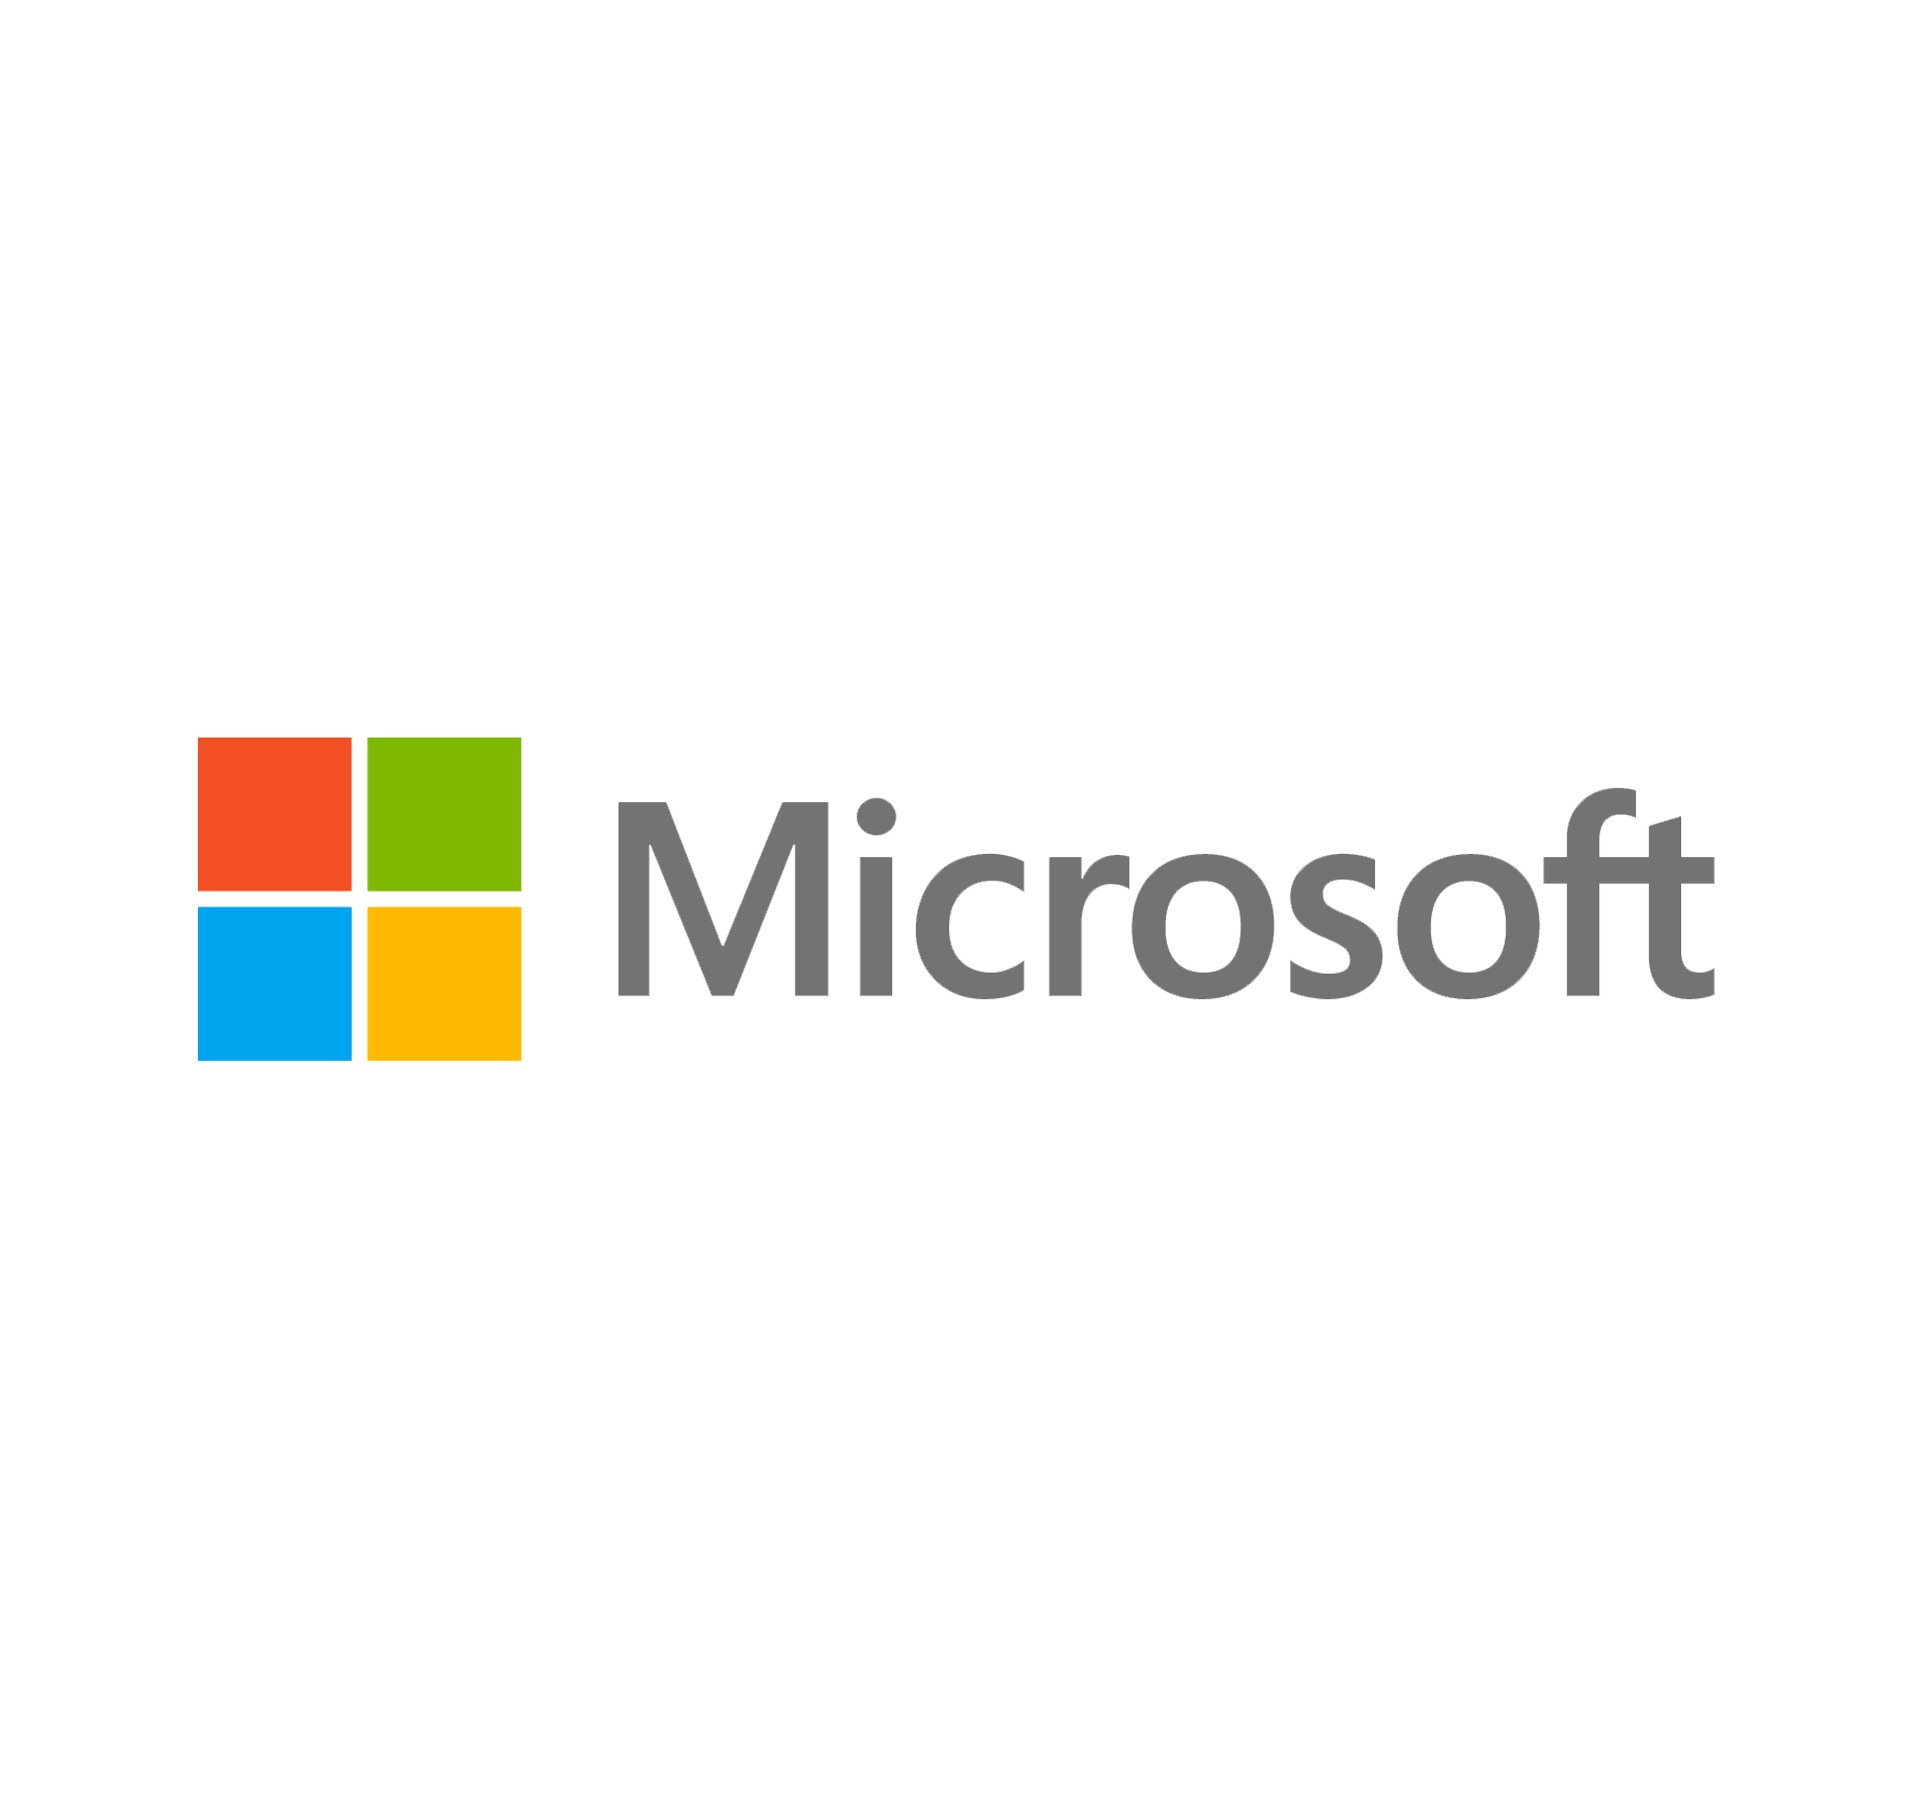 Microsoft support contact